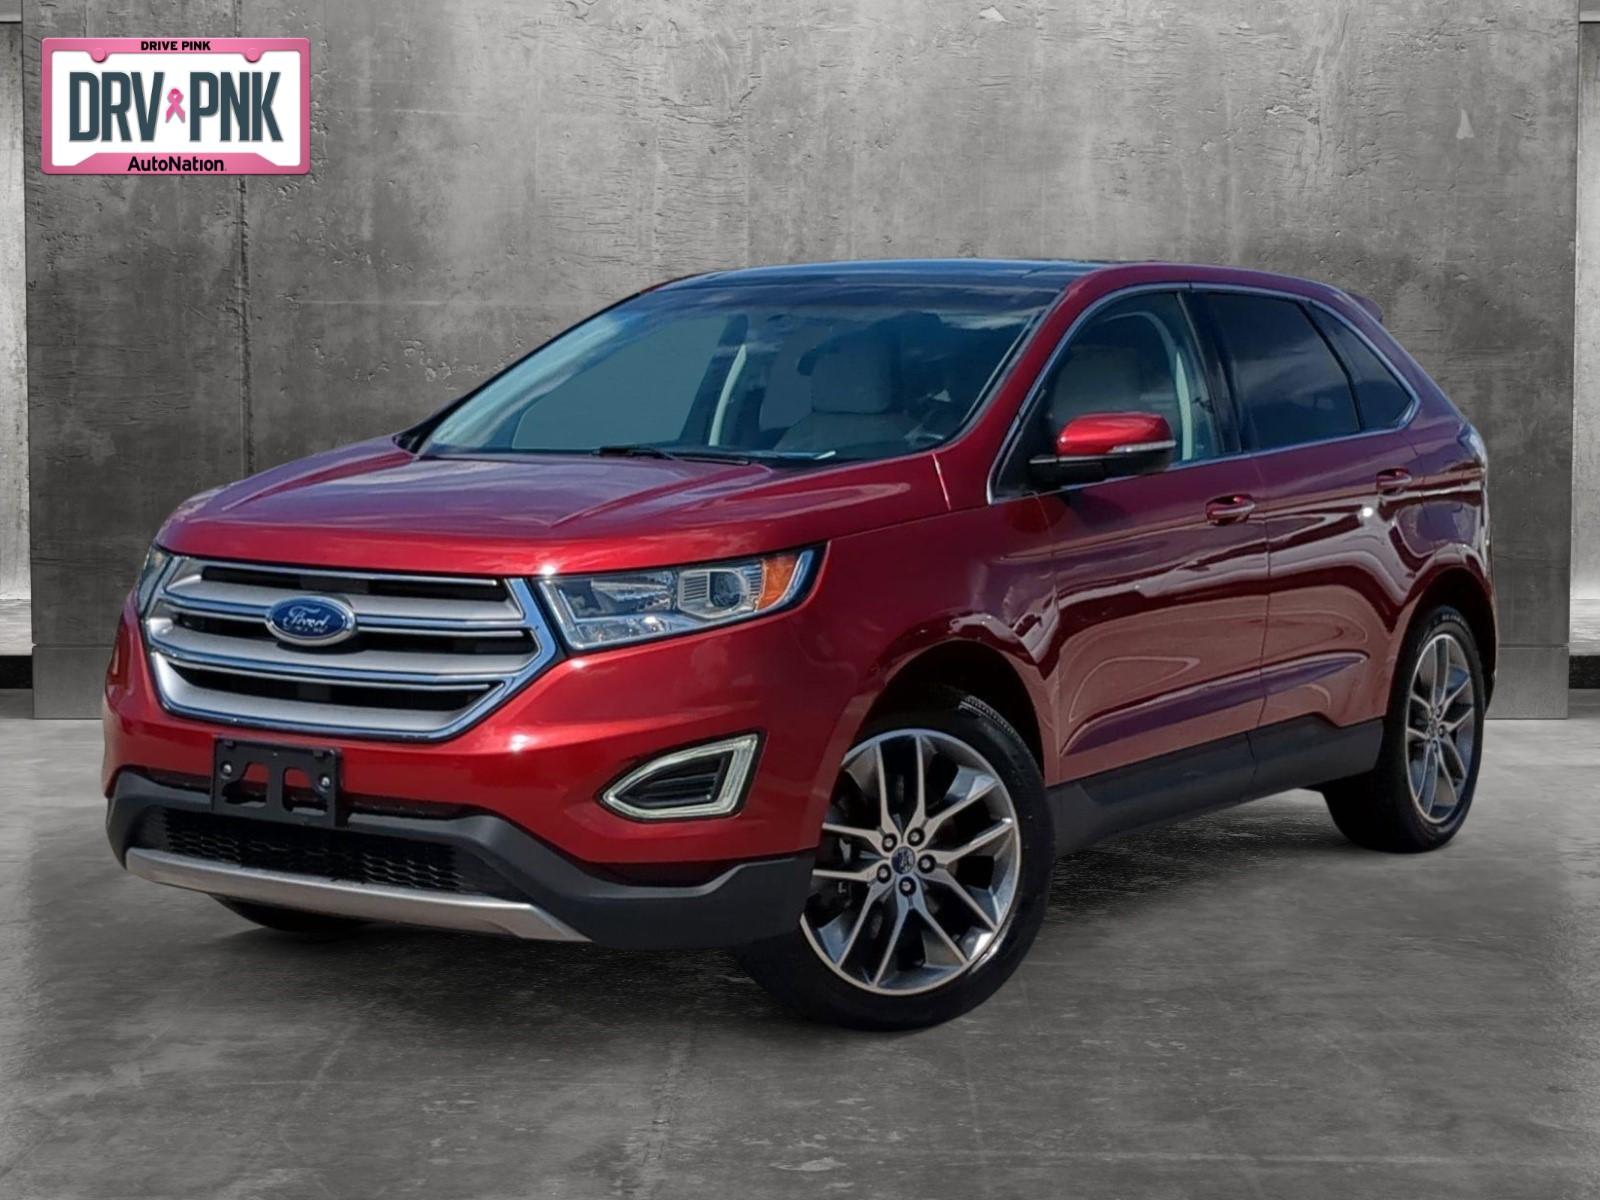 2016 Ford Edge Vehicle Photo in Ft. Myers, FL 33907